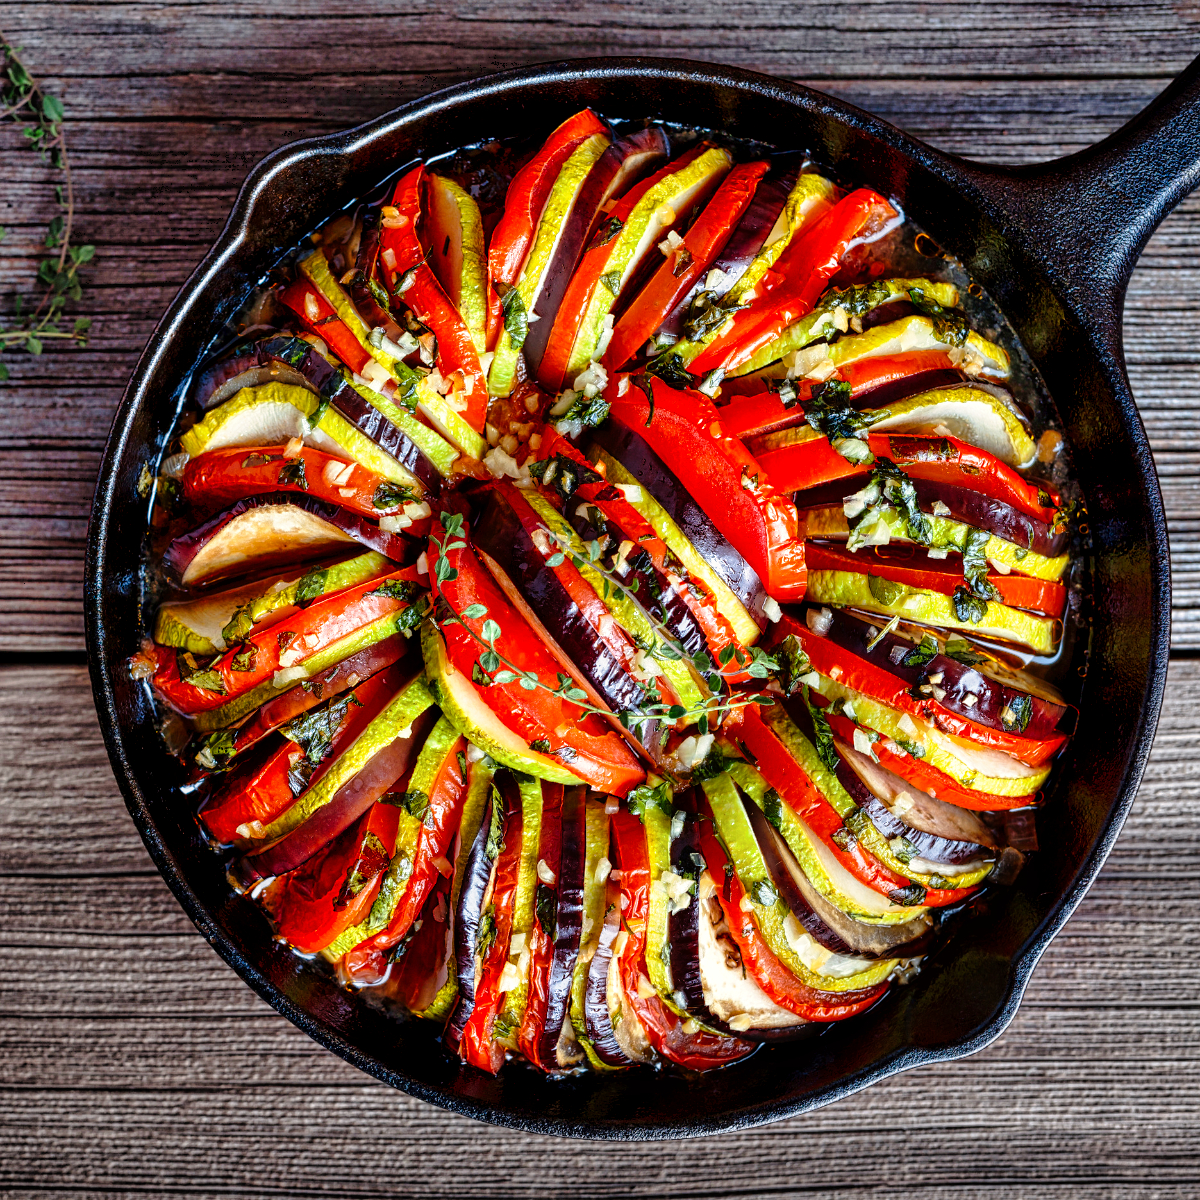 1. Traditional French Ratatouille